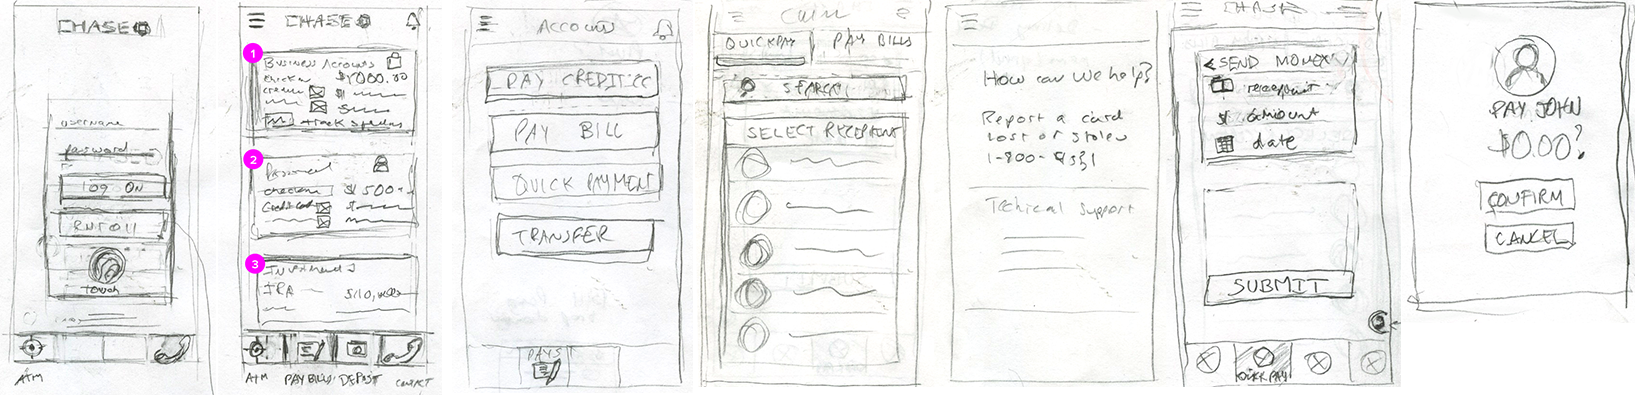 Chase wireframe sketches